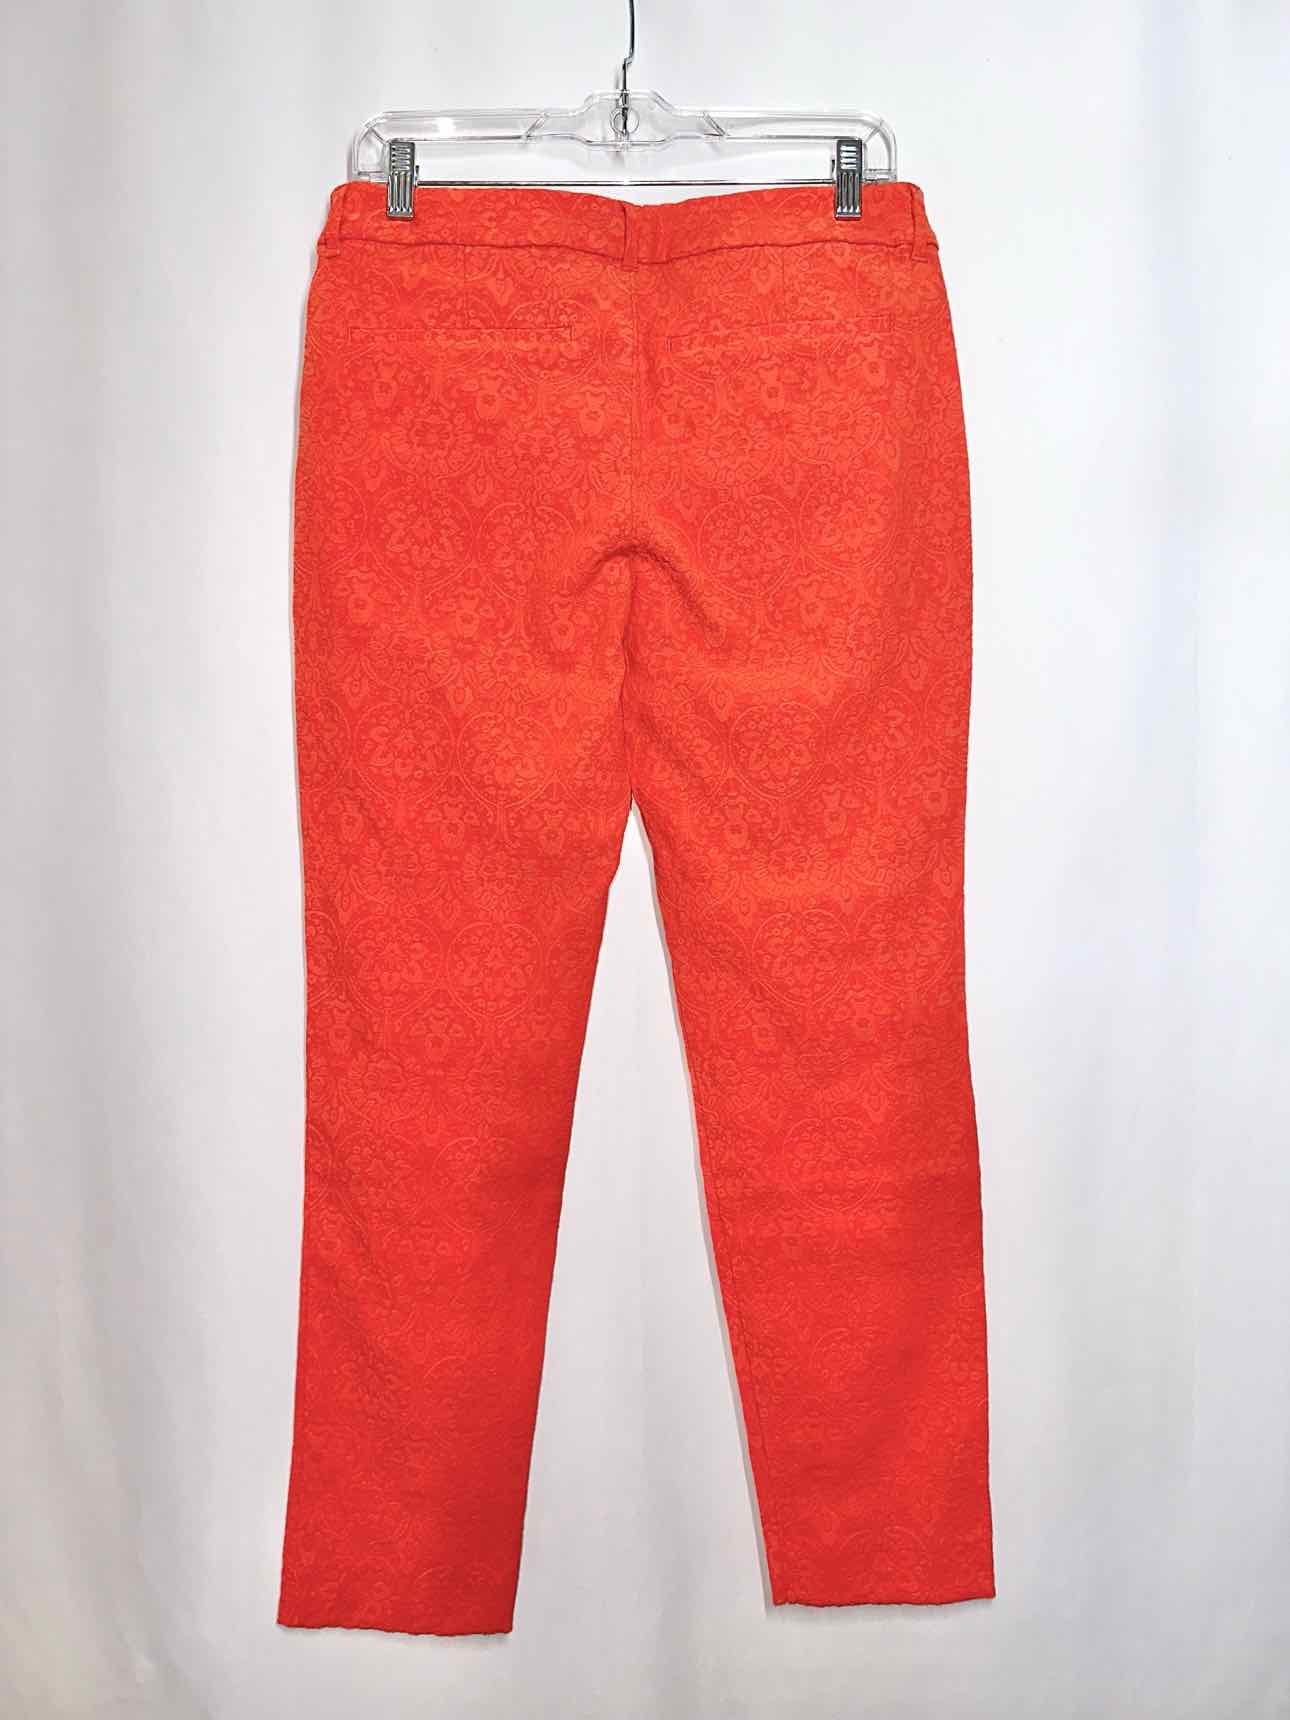 Old Navy The Pixie Embossed Coral Pants